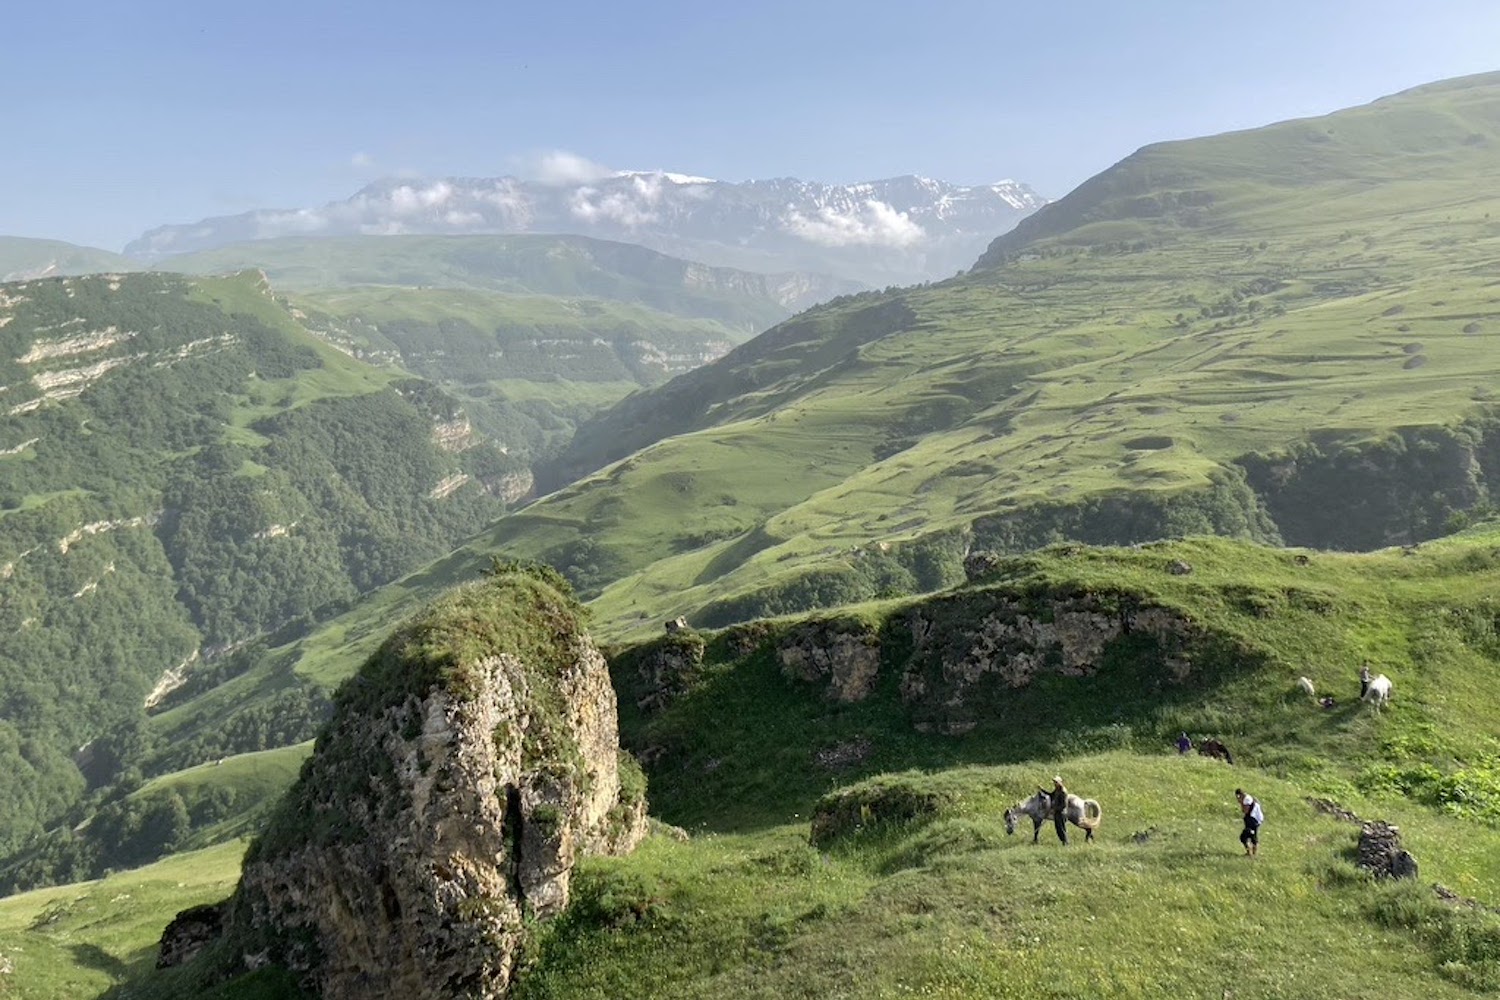 Mountains along a hiking trail in Azerbaijan. Image courtesy of the Transcaucasian Trail Association